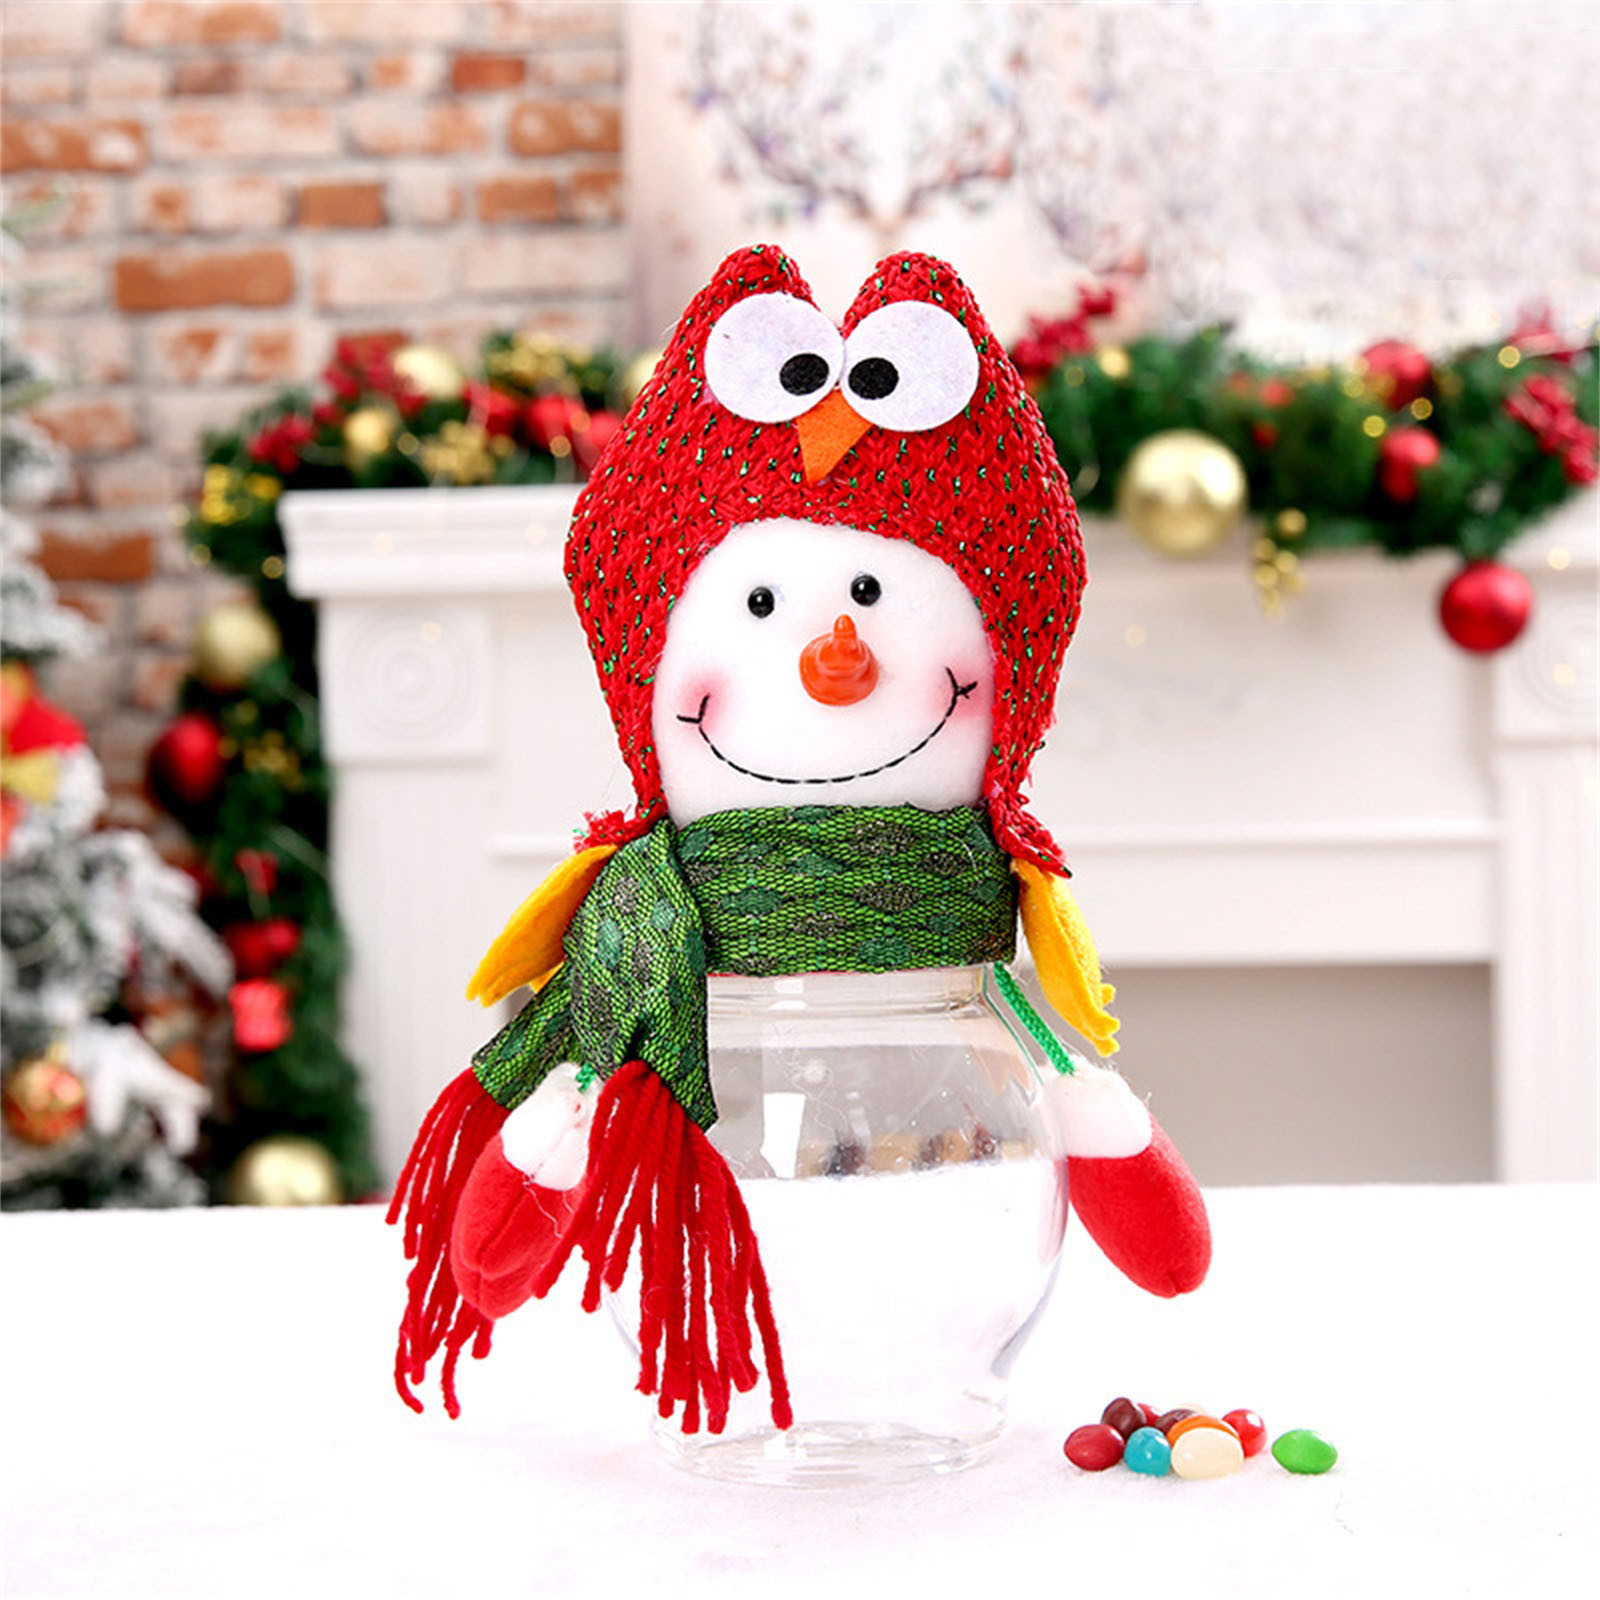 EQWLJWE Christmas Clear Candy Jar Christmas Candy Jar Cookie and Gift Container Bottle Jar Santa Claus Snowman Elk Transparent Ball Candy Jar Christmas Chocolate Storage Jar Container Snowman - image 2 of 4